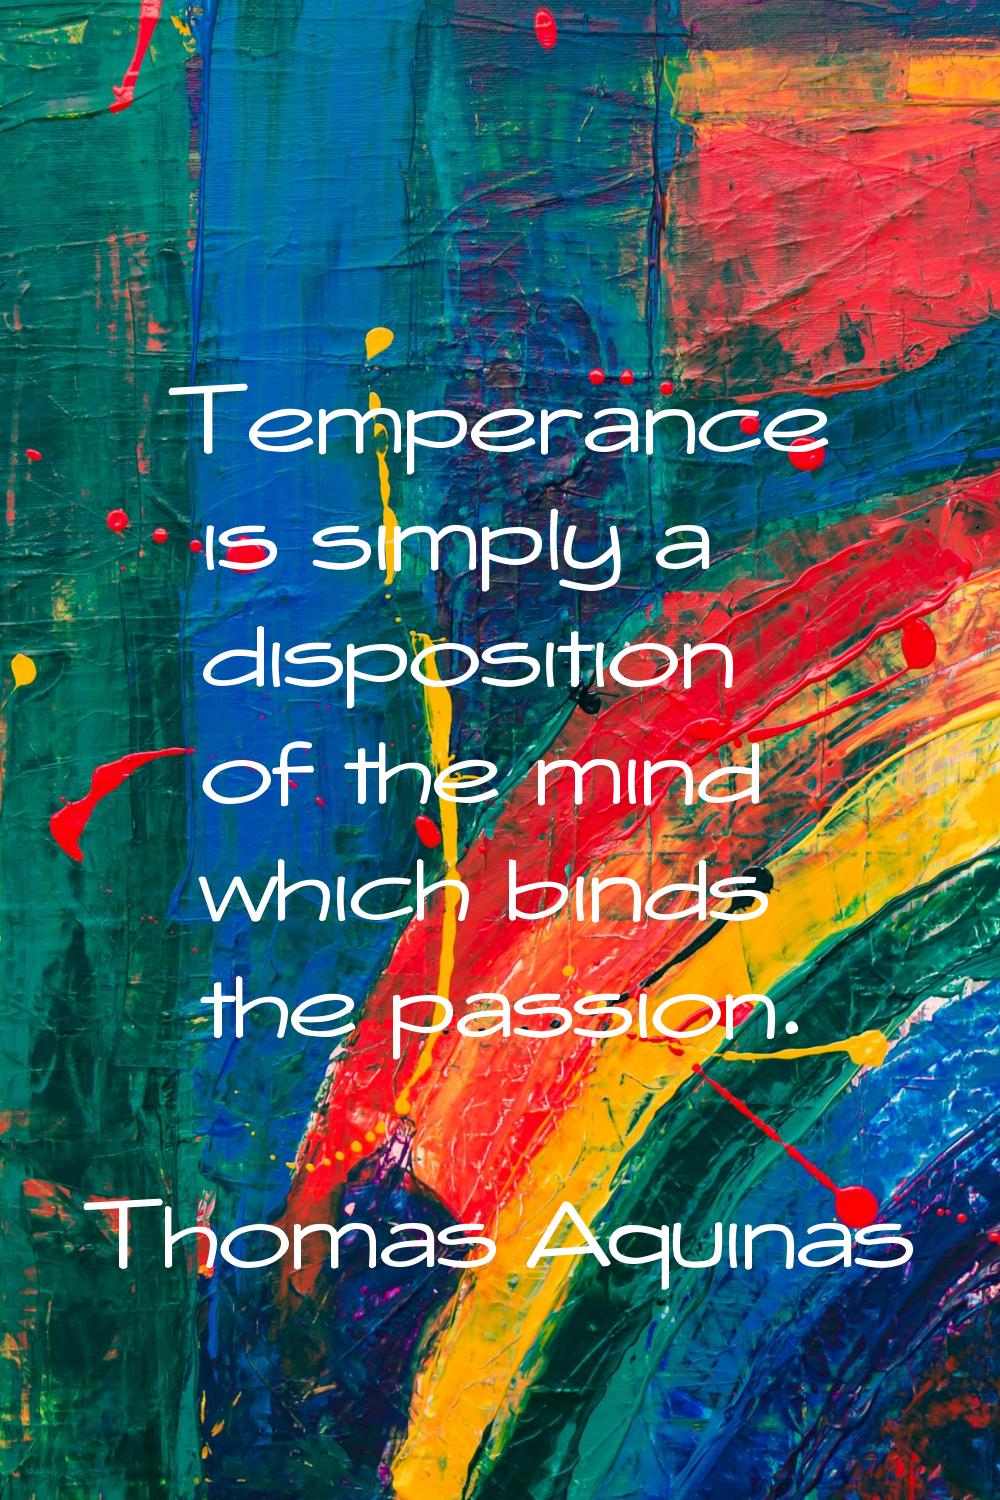 Temperance is simply a disposition of the mind which binds the passion.